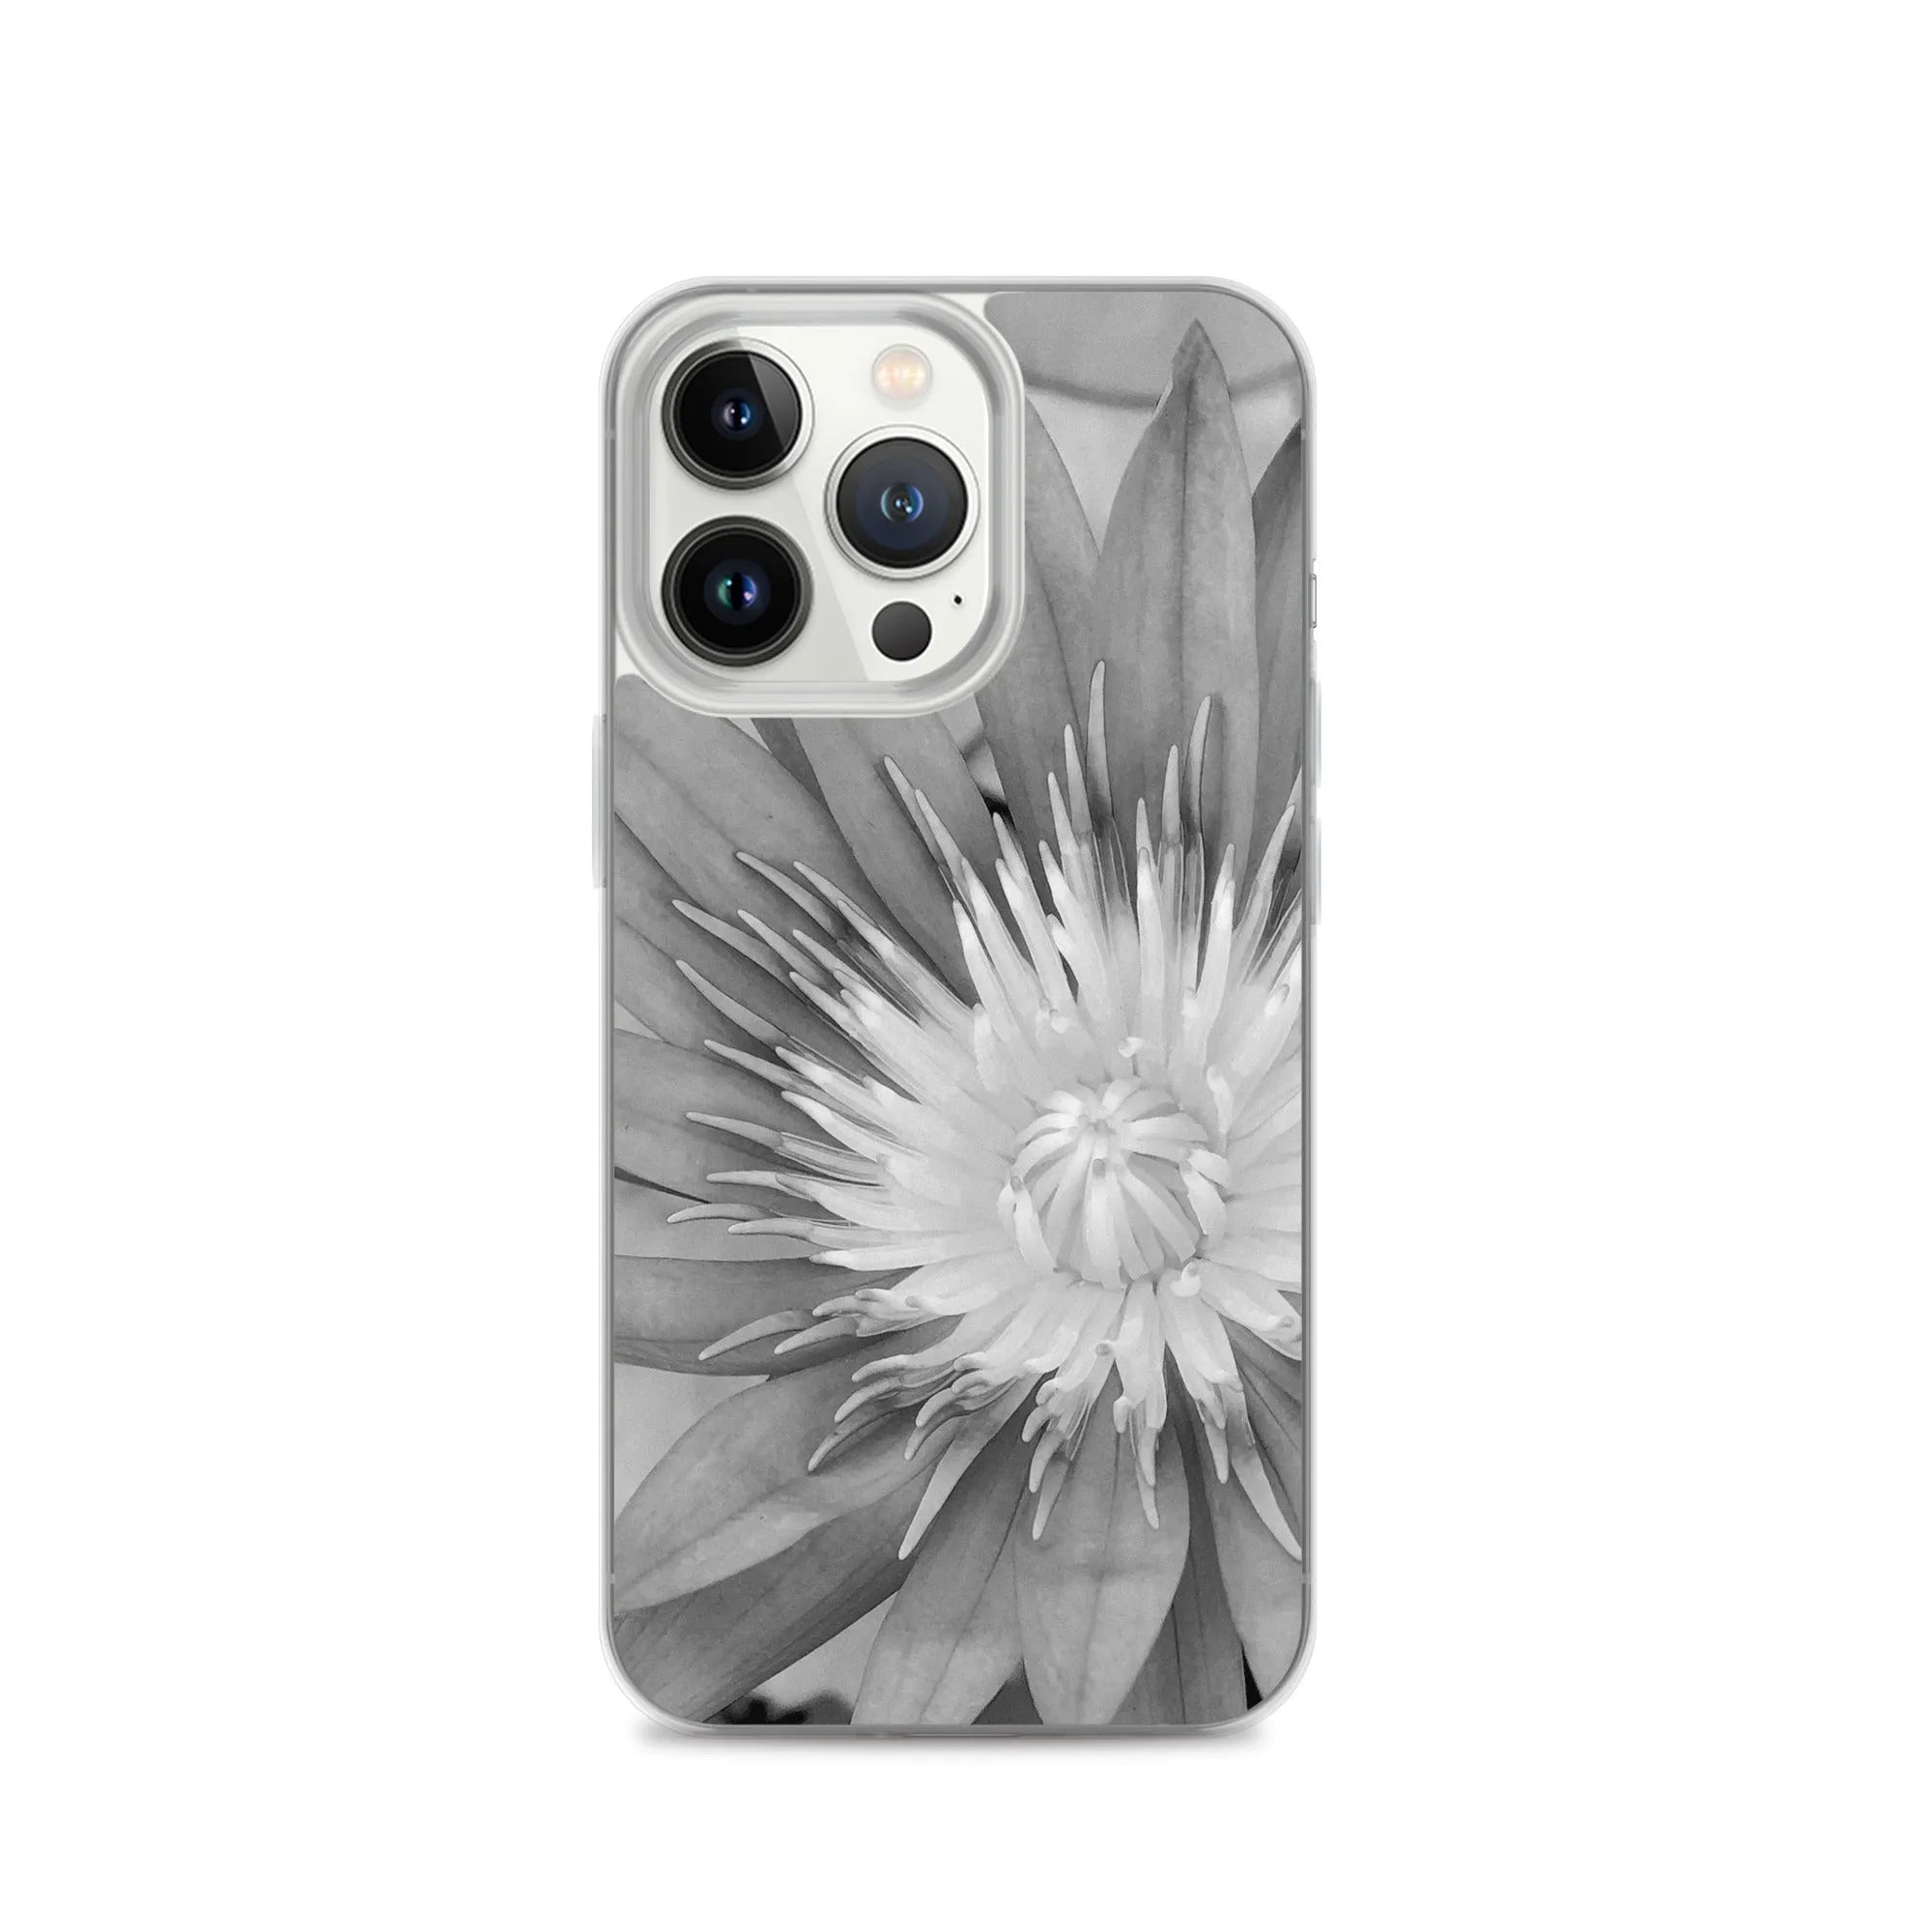 Lilliput Floral Iphone Case - Black And White - Iphone 13 Pro - Mobile Phone Cases - Aesthetic Art